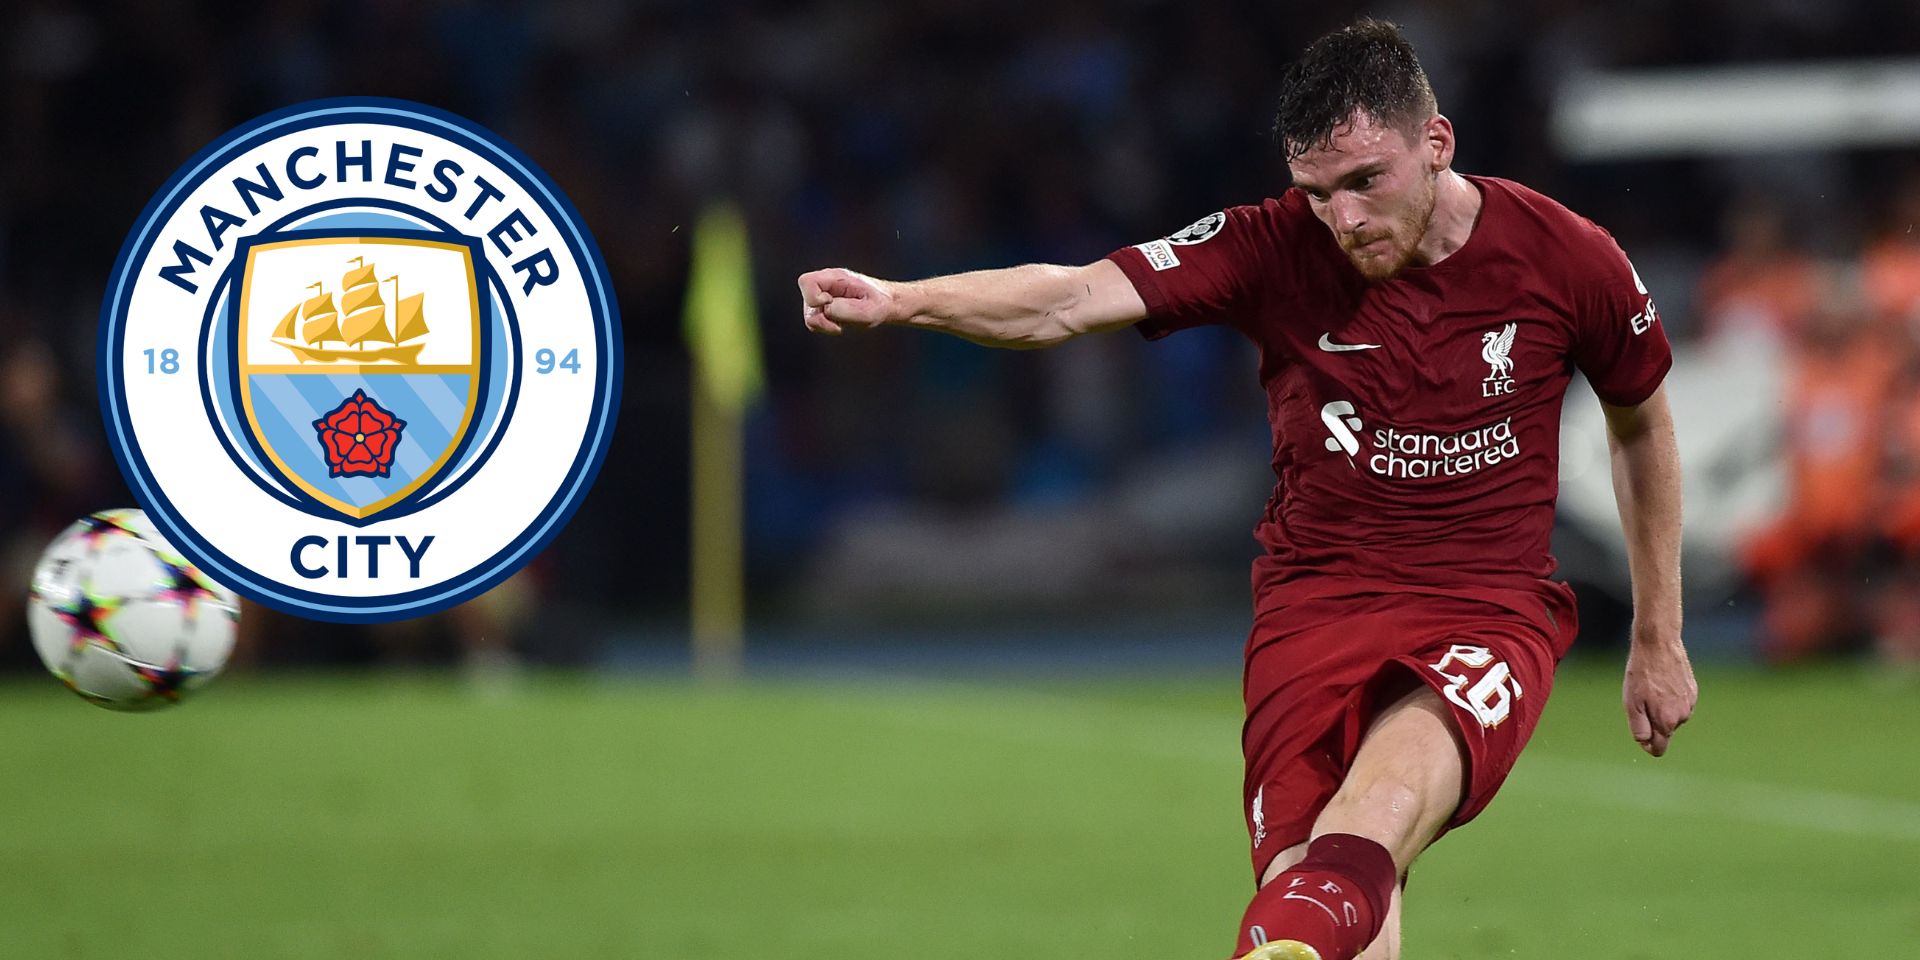 Andy Robertson on what Liverpool ‘have been lacking this season’ ahead of Man City game